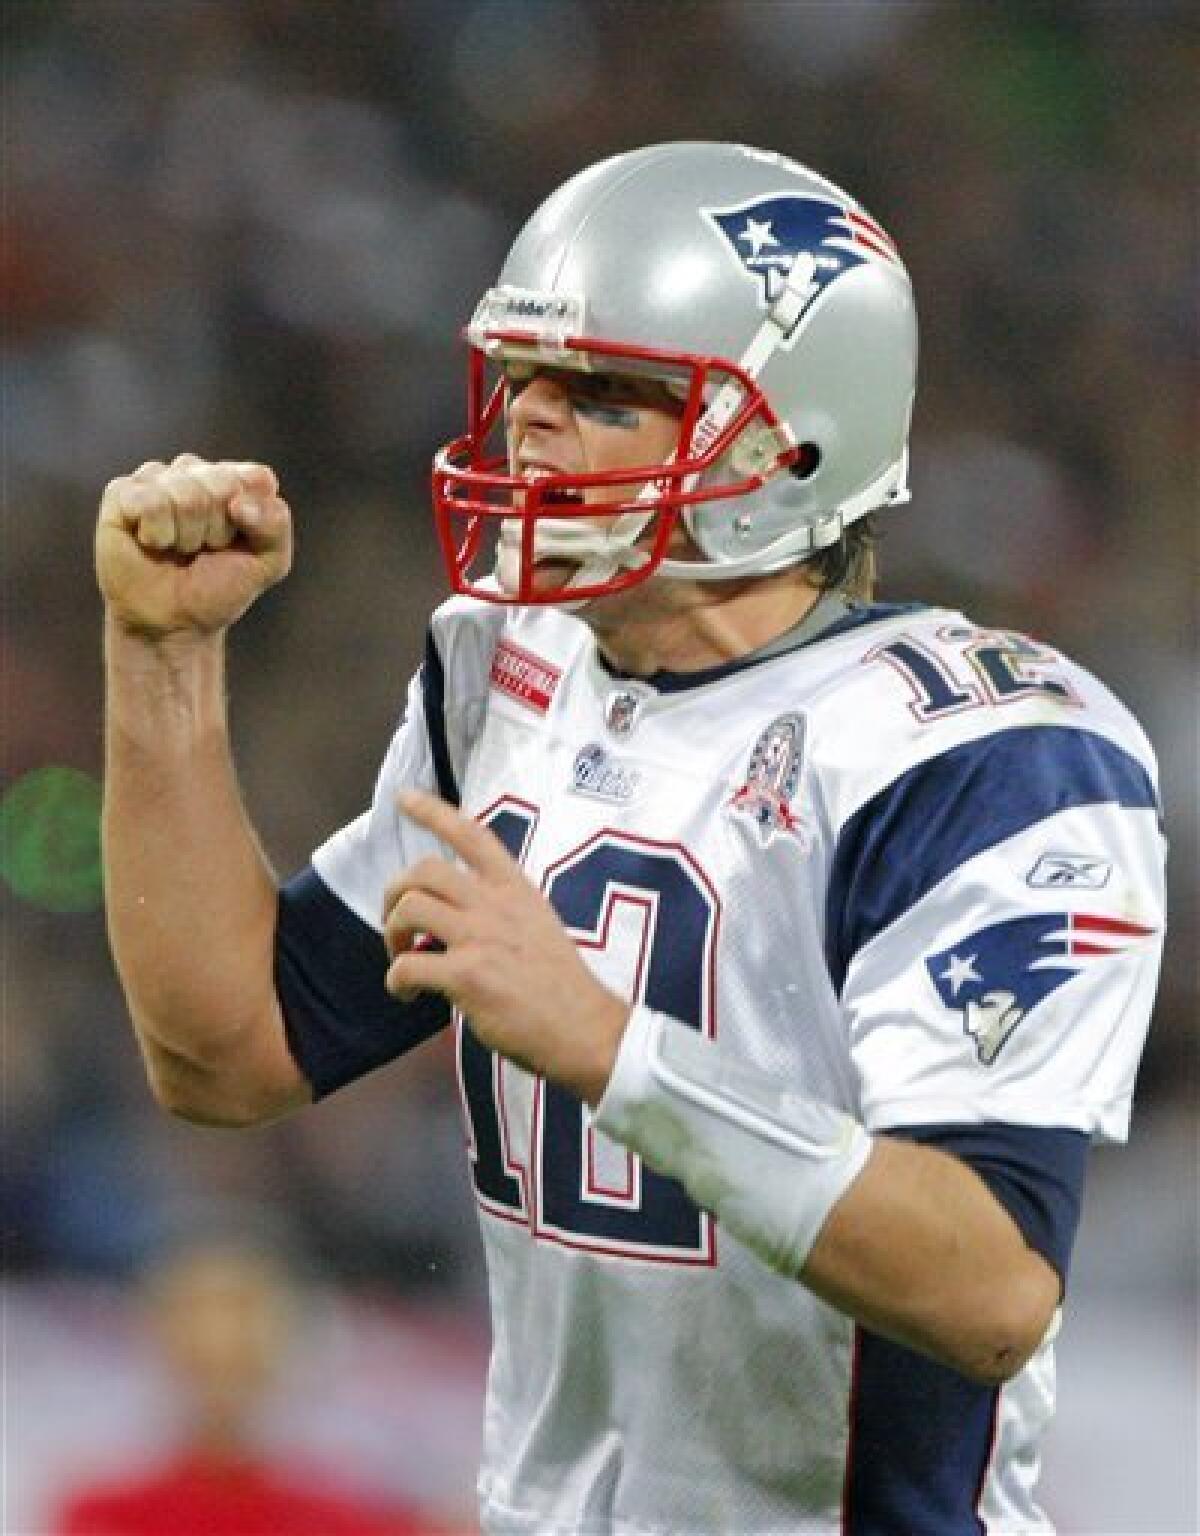 Tom Brady sets NFL record with 5 TD passes in ONE QUARTER vs. Titans in 2009  